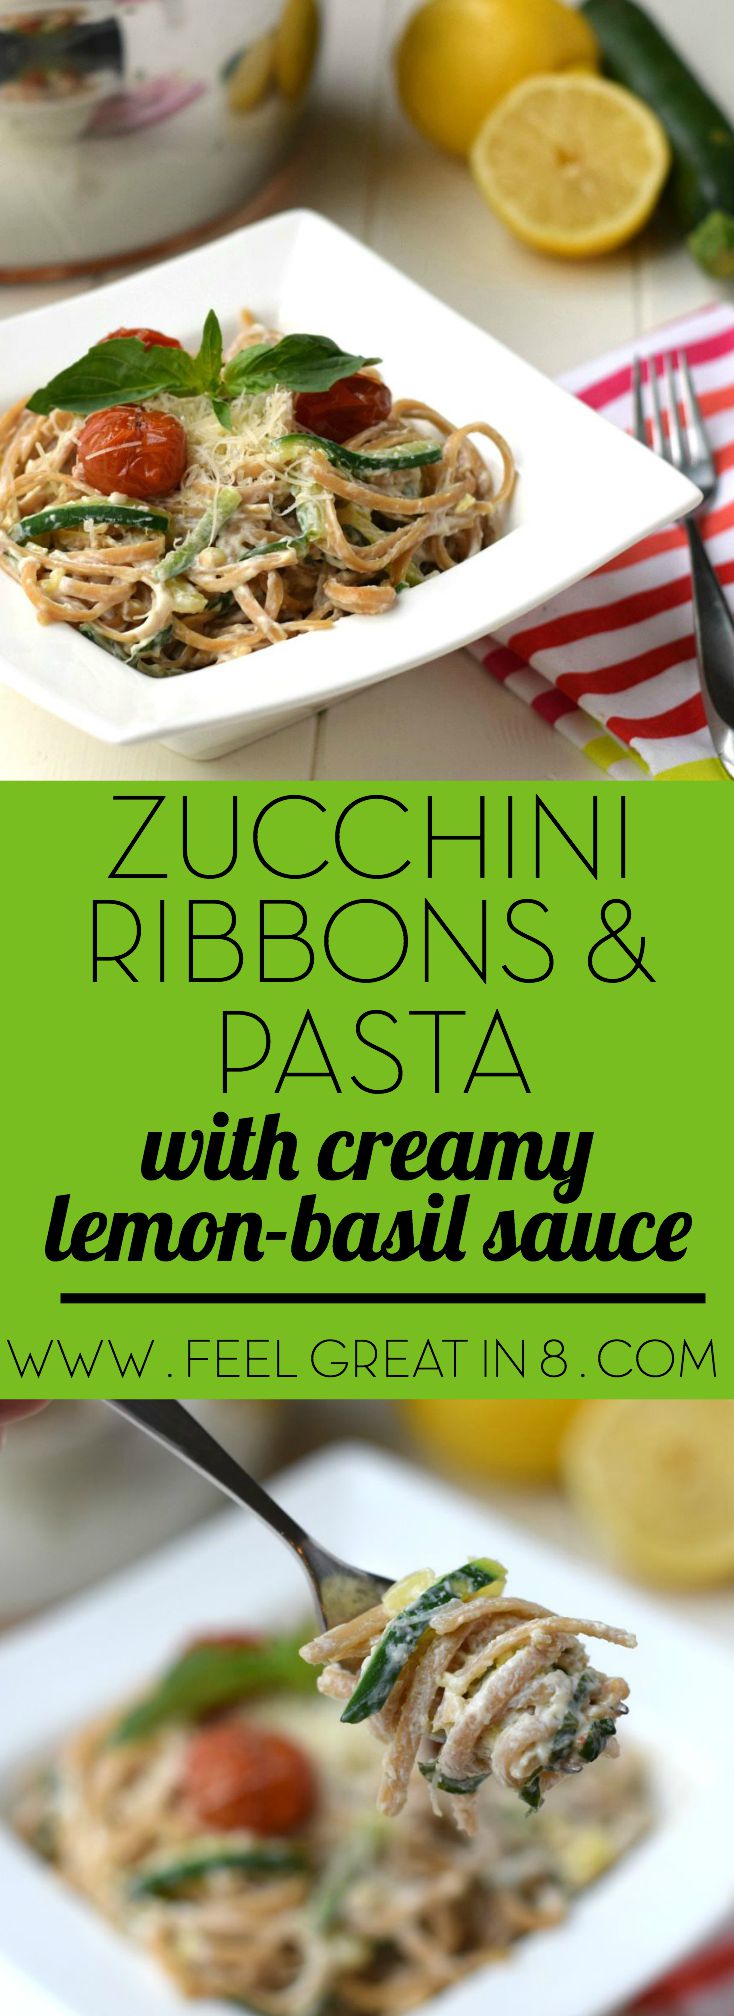 This quick, easy, and healthy Zucchini Ribbons & Pasta with Creamy Lemon-Basil Sauce is a delicious way to add veggies to a family favorite dish. You'll love the fresh Italian flavors!